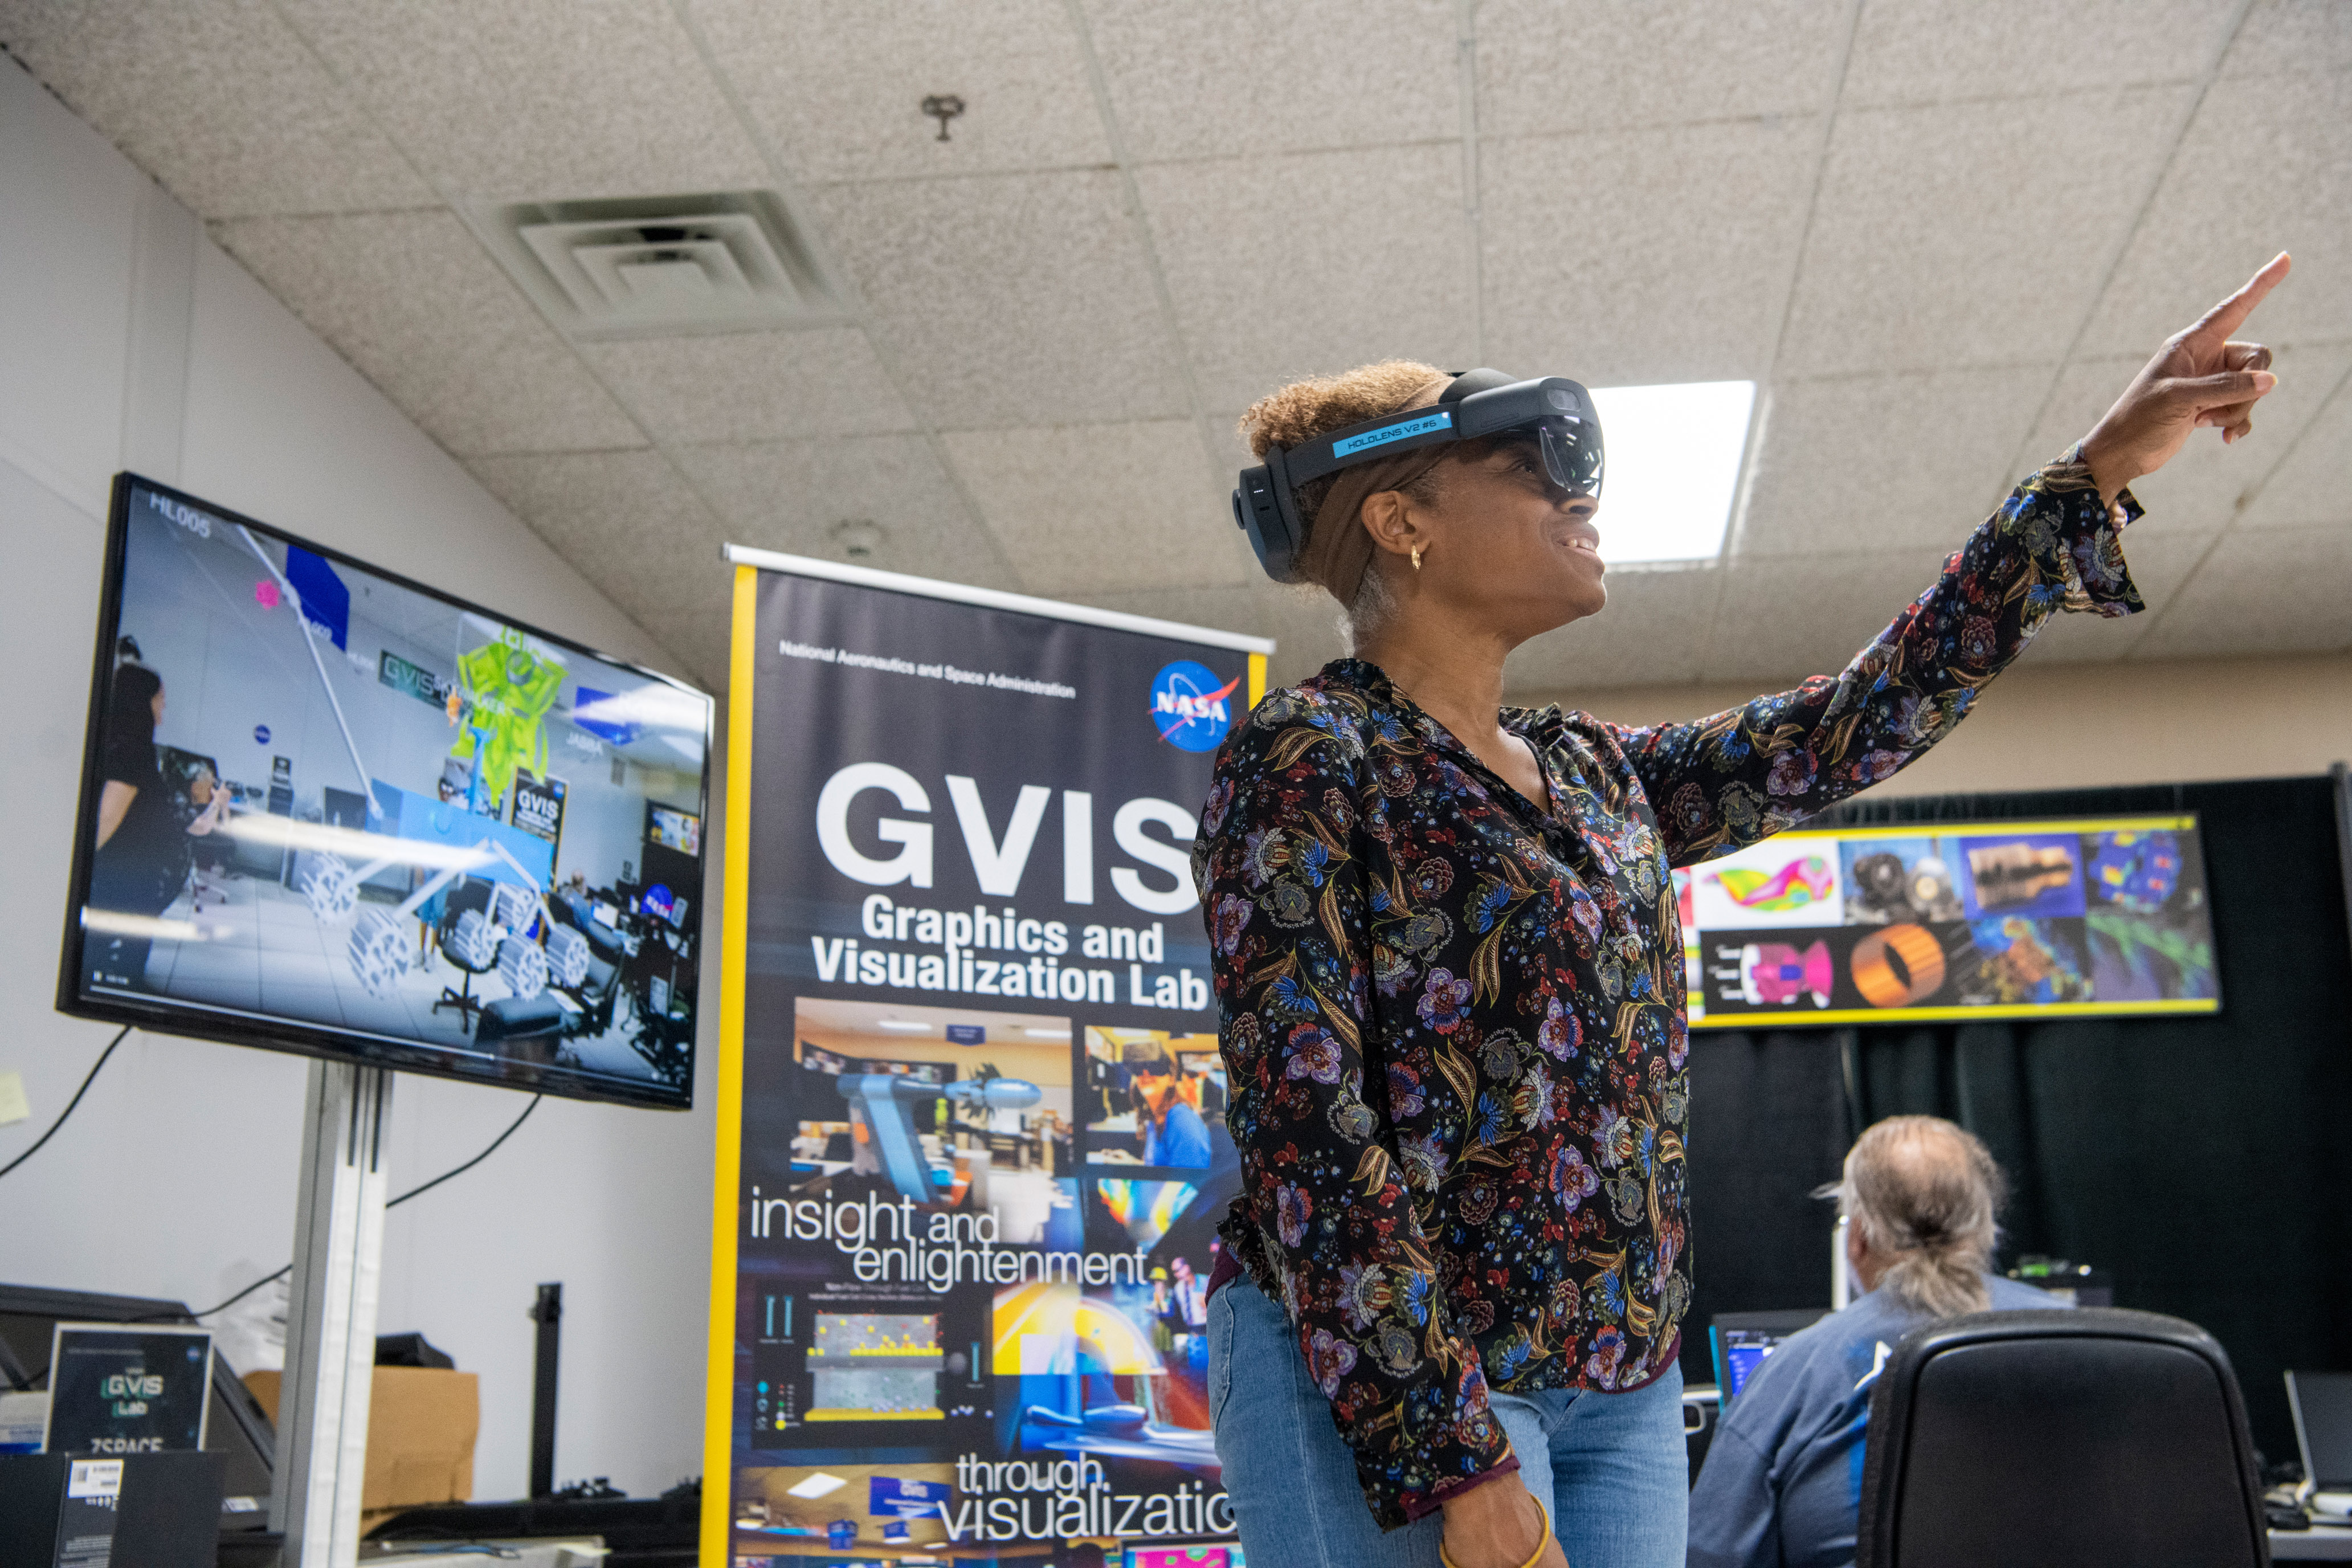 slide 4 - NASA engineer looks through the Microsoft HoloLens to see the spacecrafts the students designed.